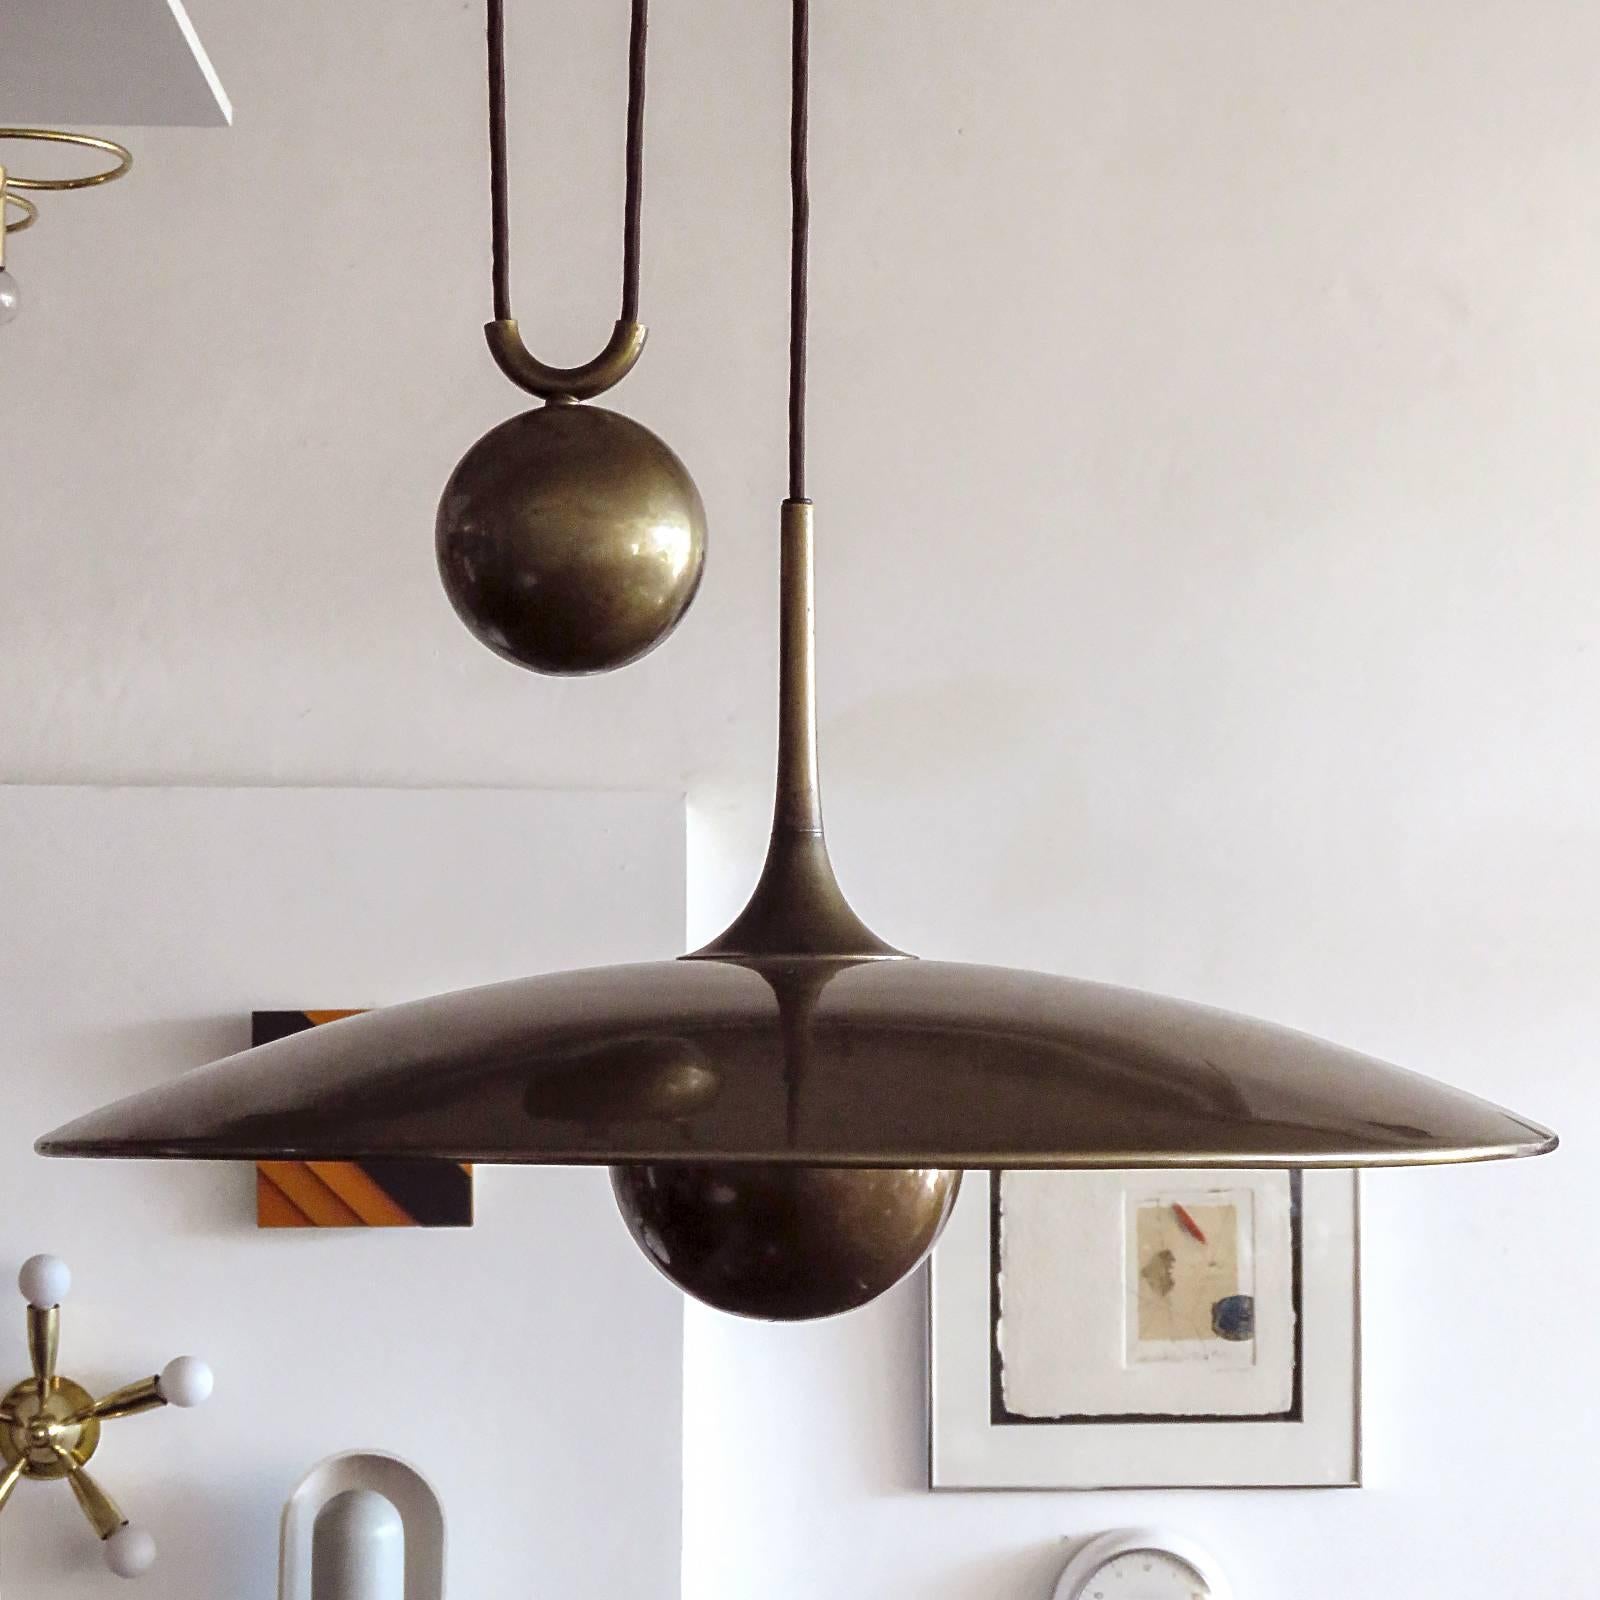 Beautiful large dark brass saucer pendant by Florian Schulz, with very heavy solid brass sphere pulley mechanism, early production, current extension capability from 12